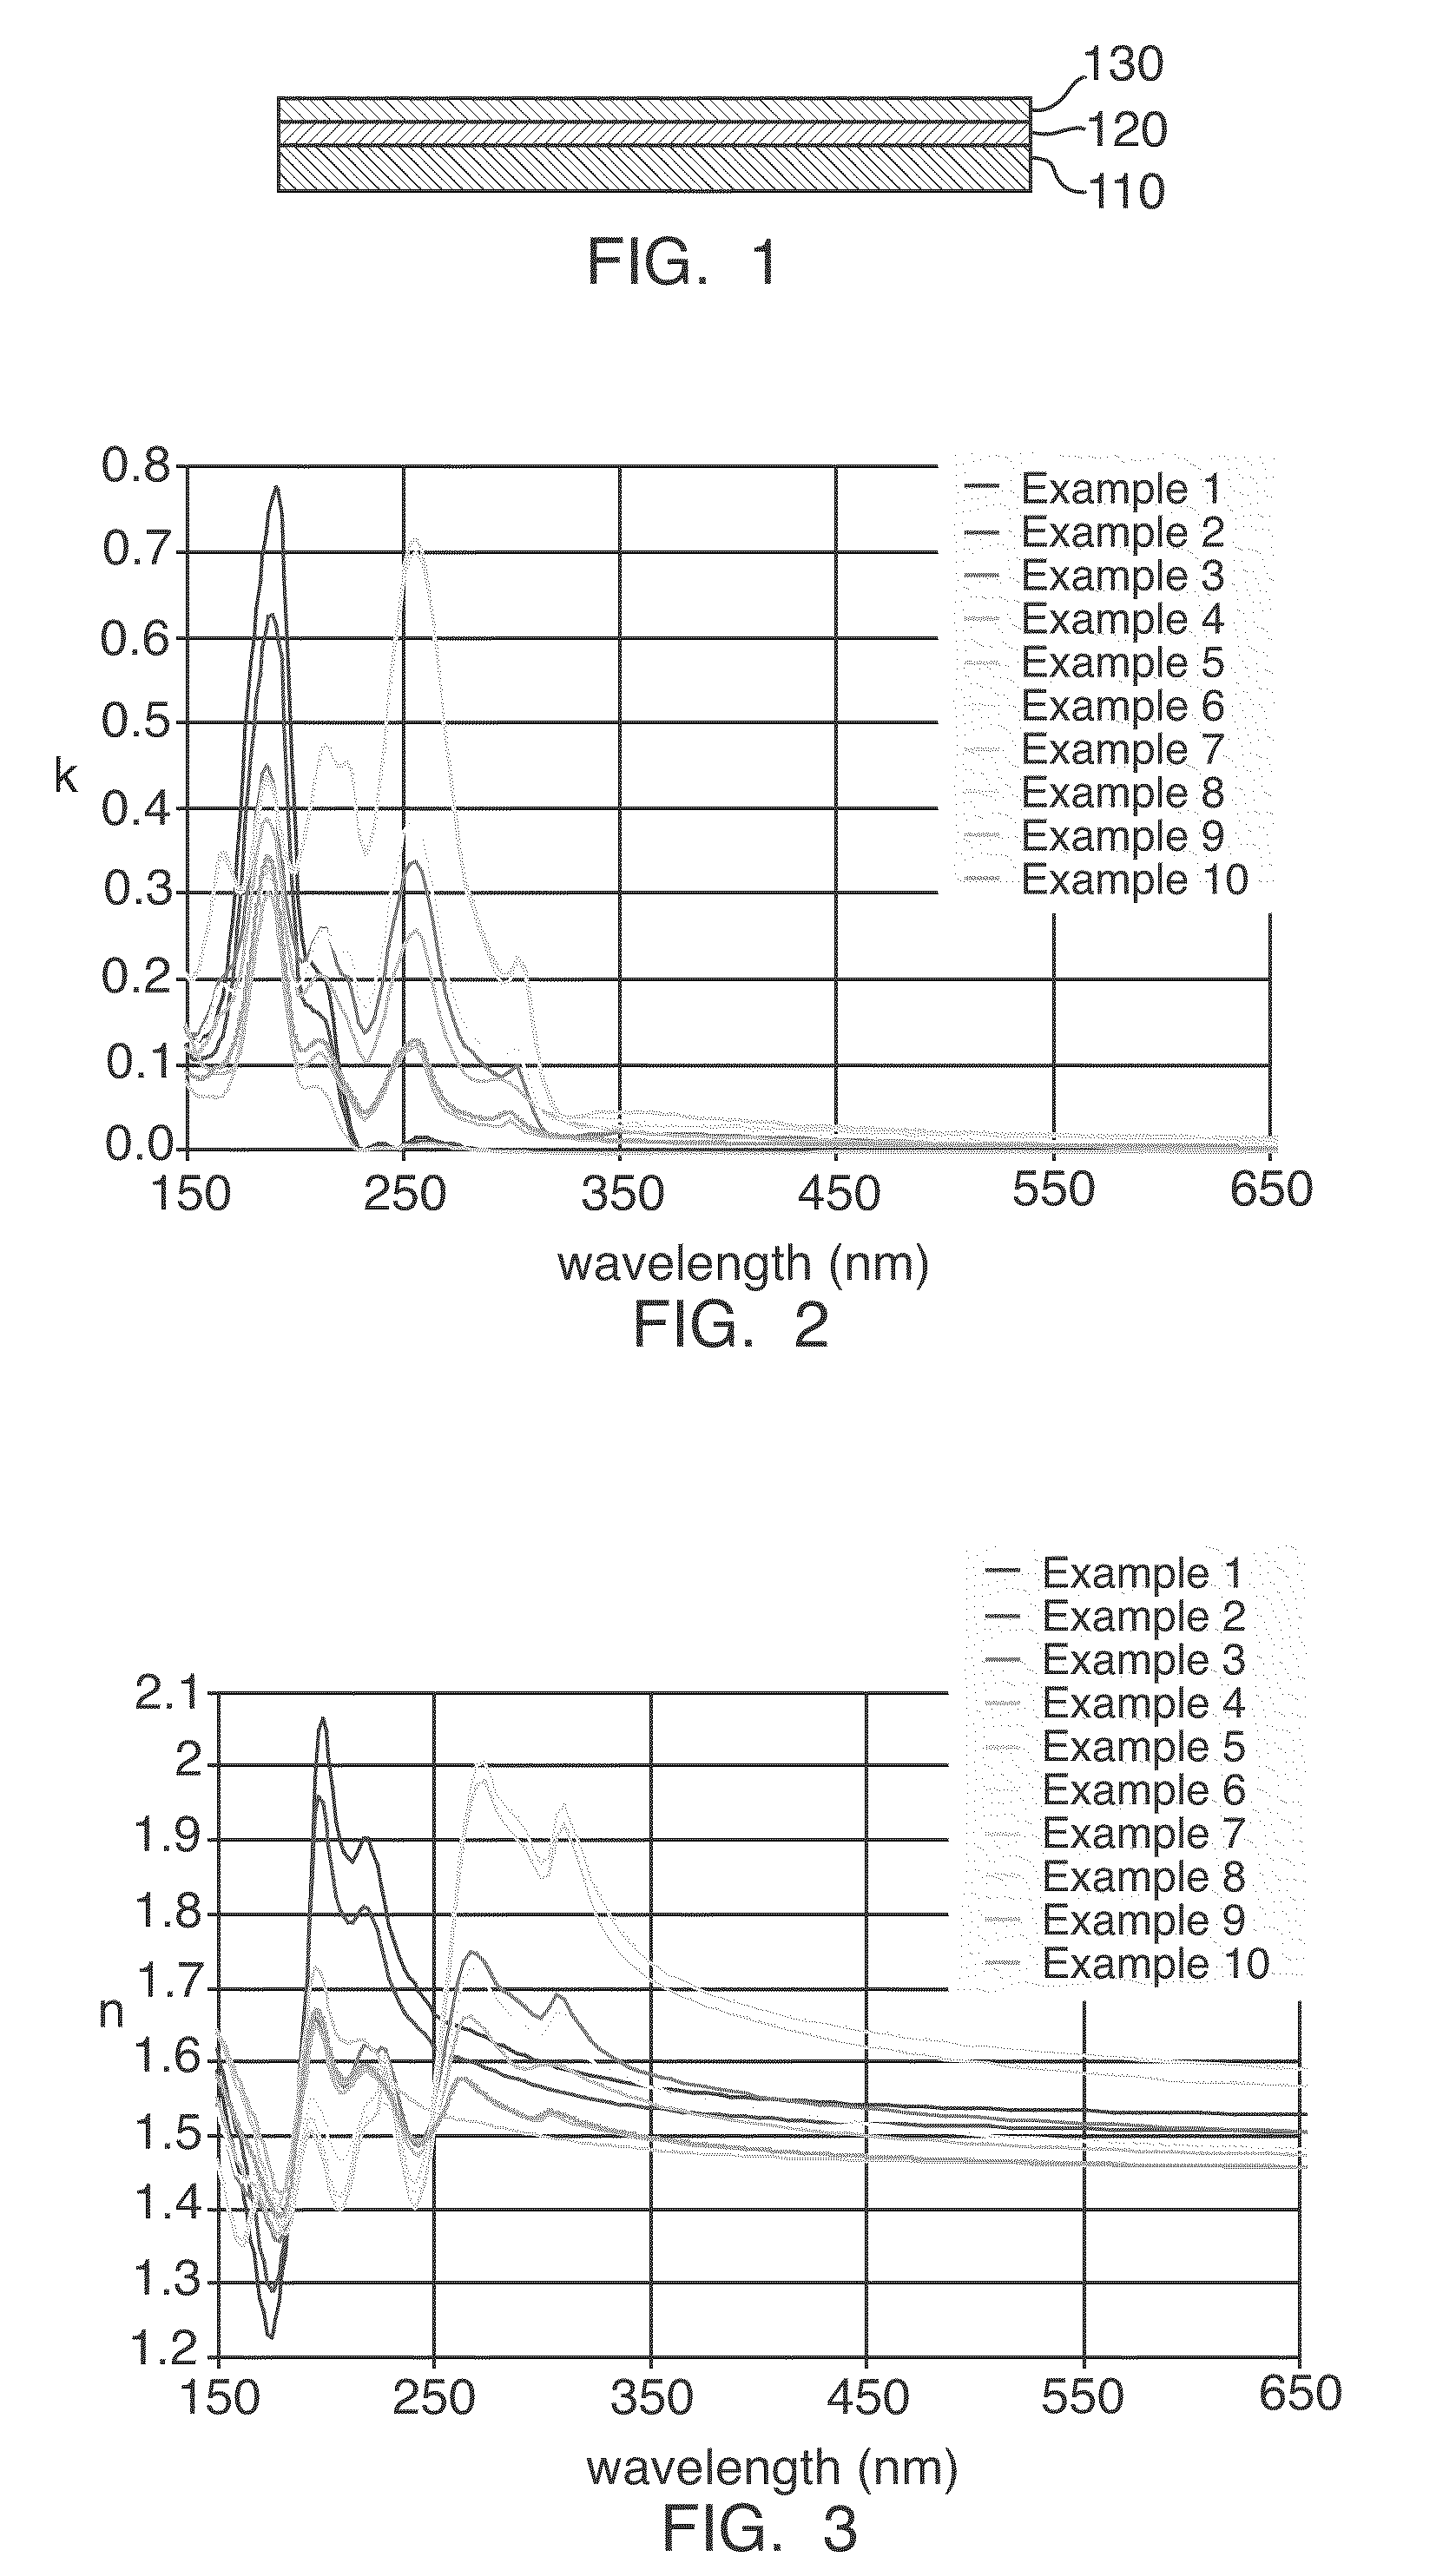 Carbosilane polymer compositions for Anti-reflective coatings